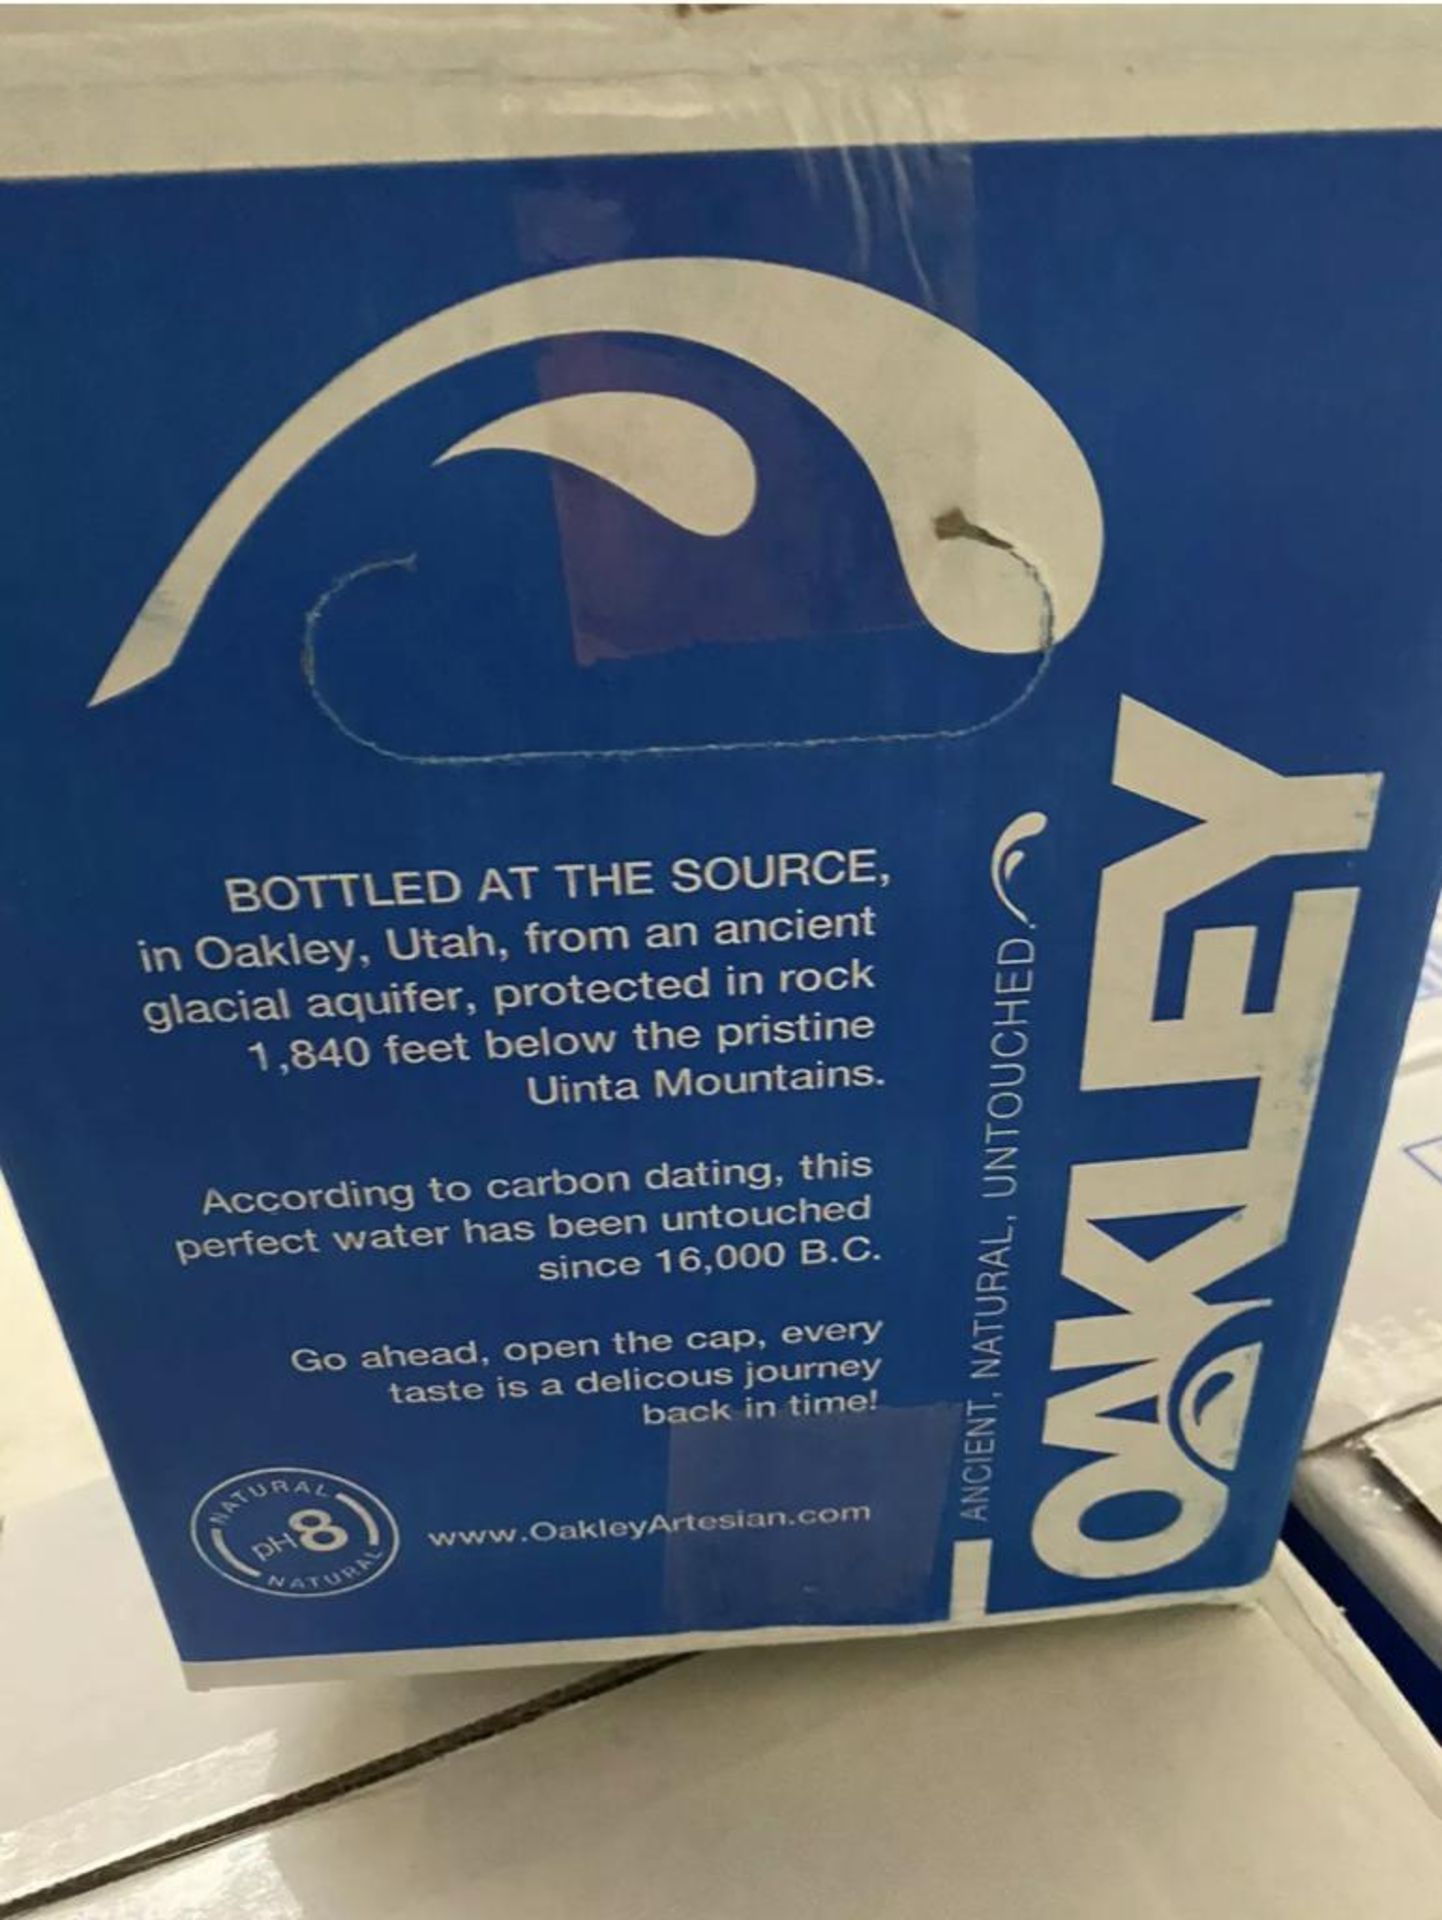 50 x Boxes of Oakley Artisan Water - Best Before Dec 2021 - 12 Packs in Each Box - Includes 600 - Image 5 of 8